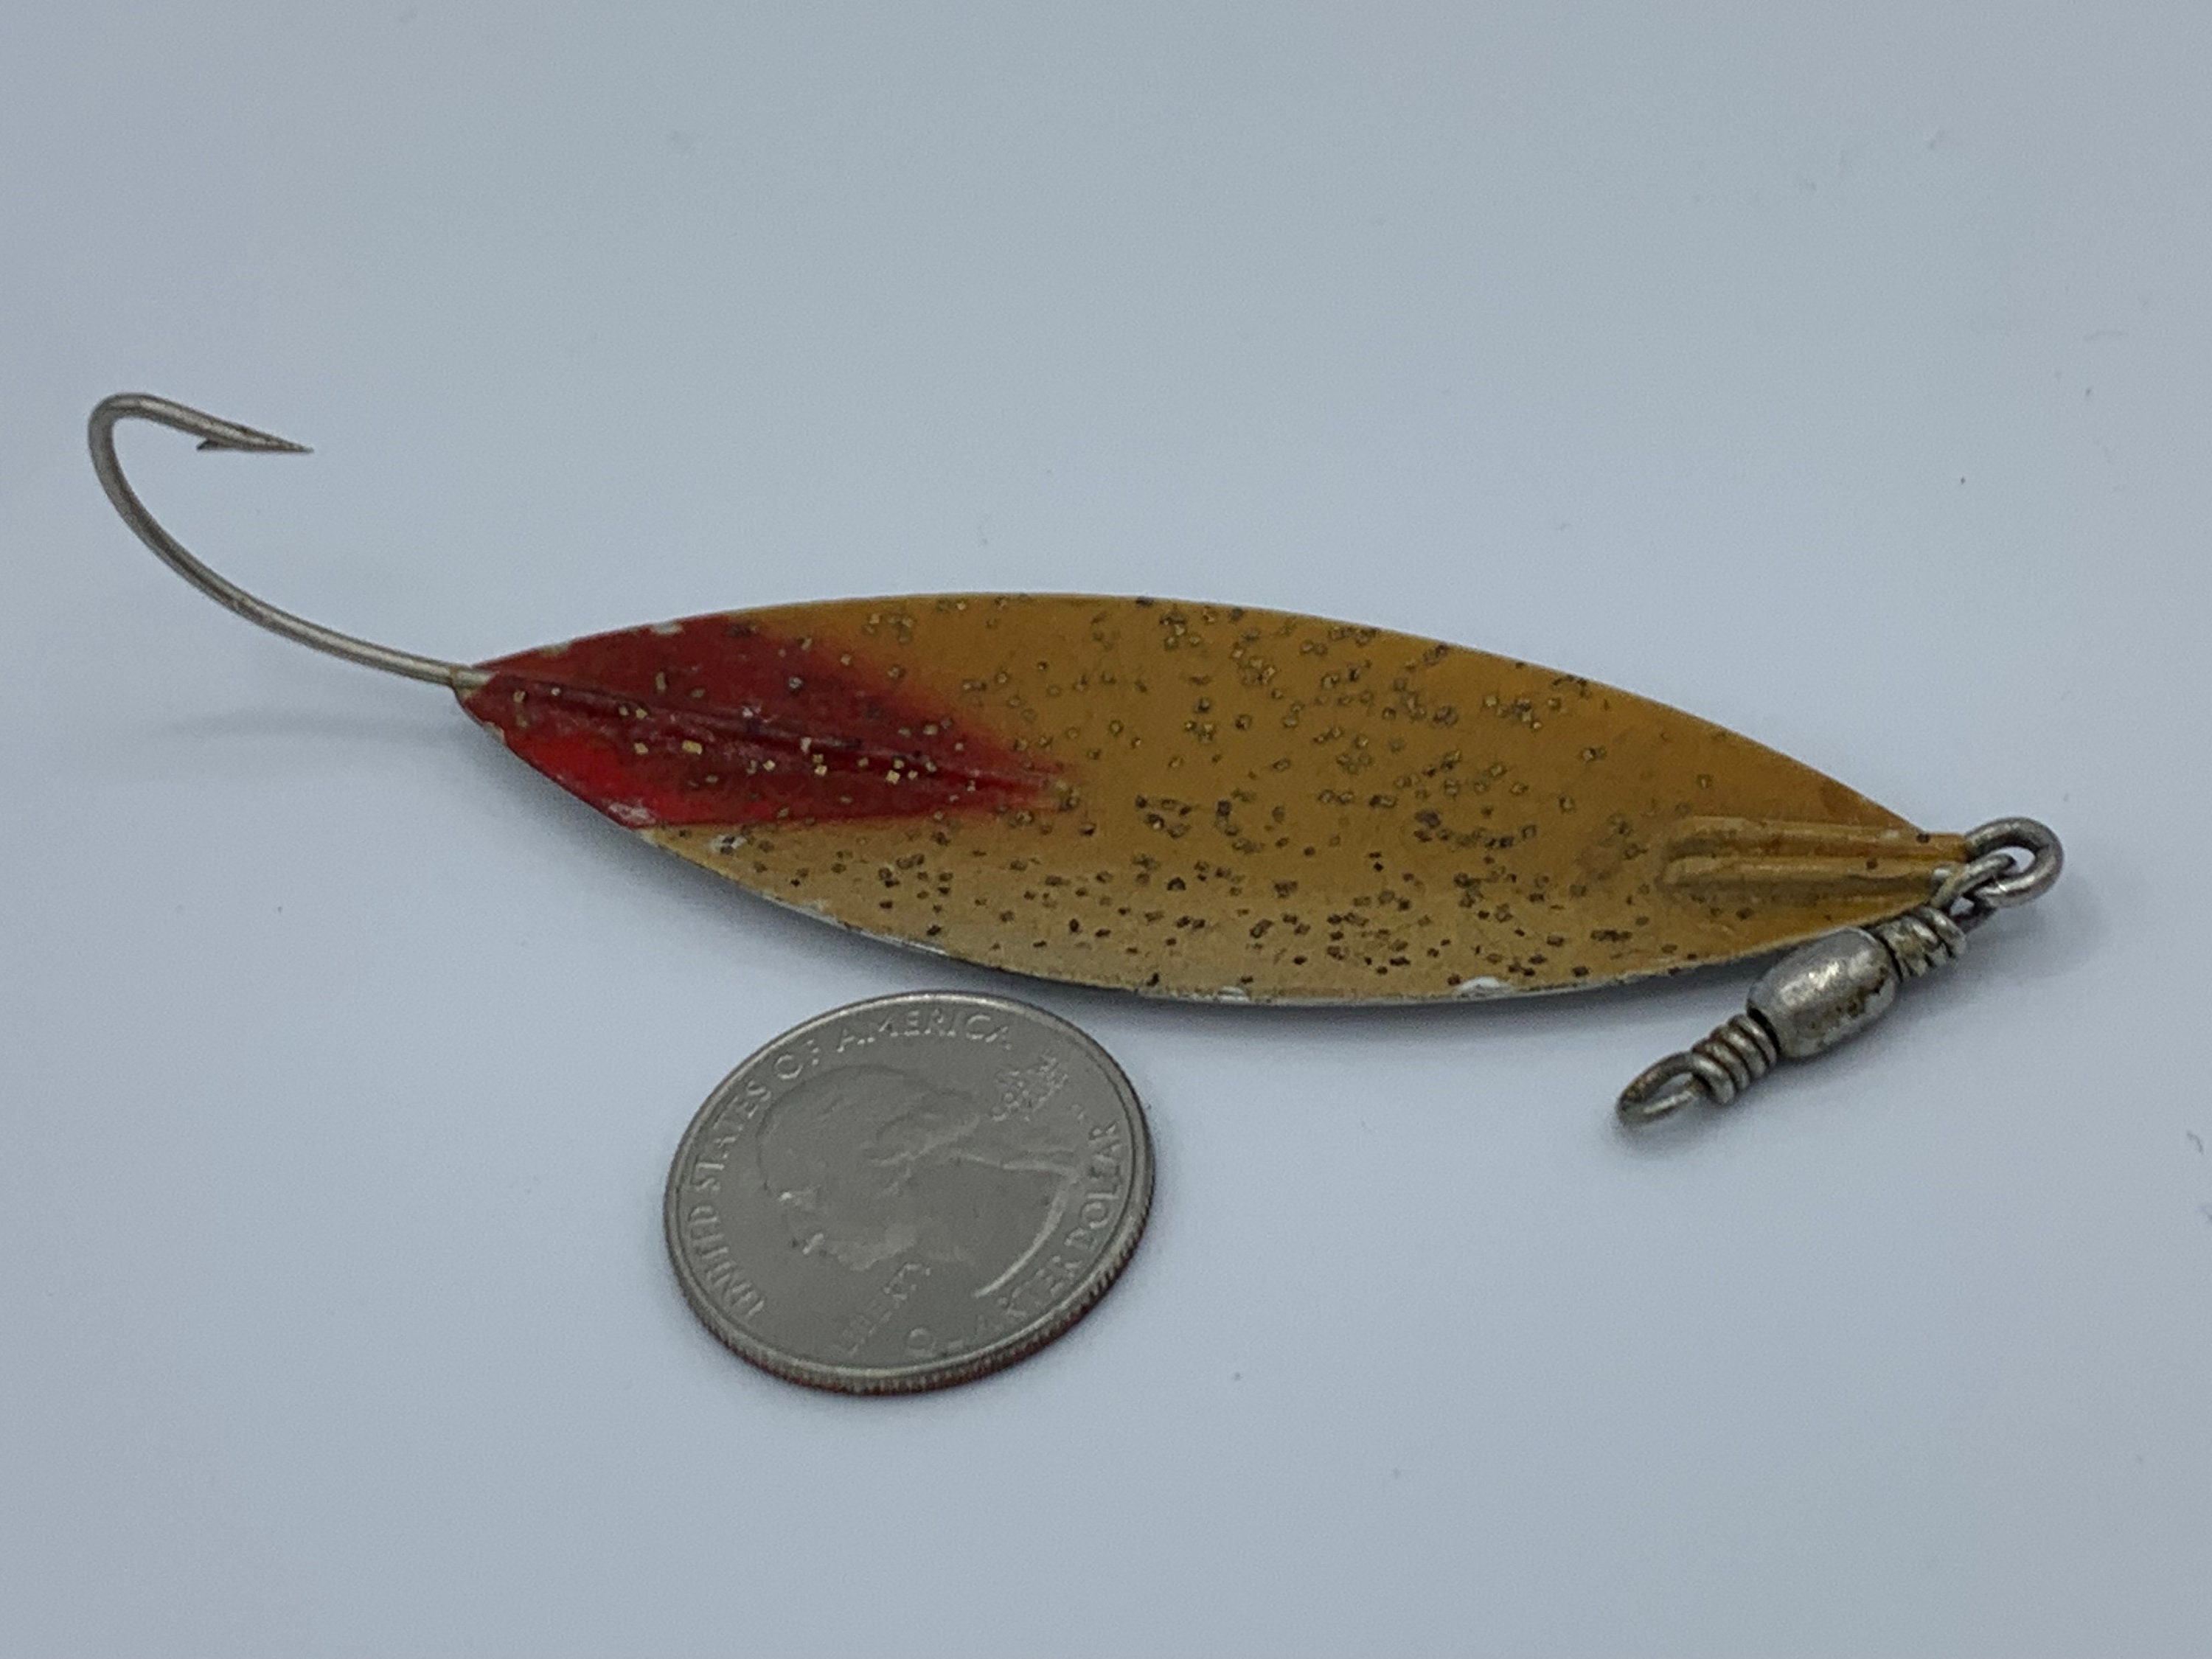 Vintage 1950s BrylCreem's Royal Spoon Gold Metal Spoon Fishing Lure.